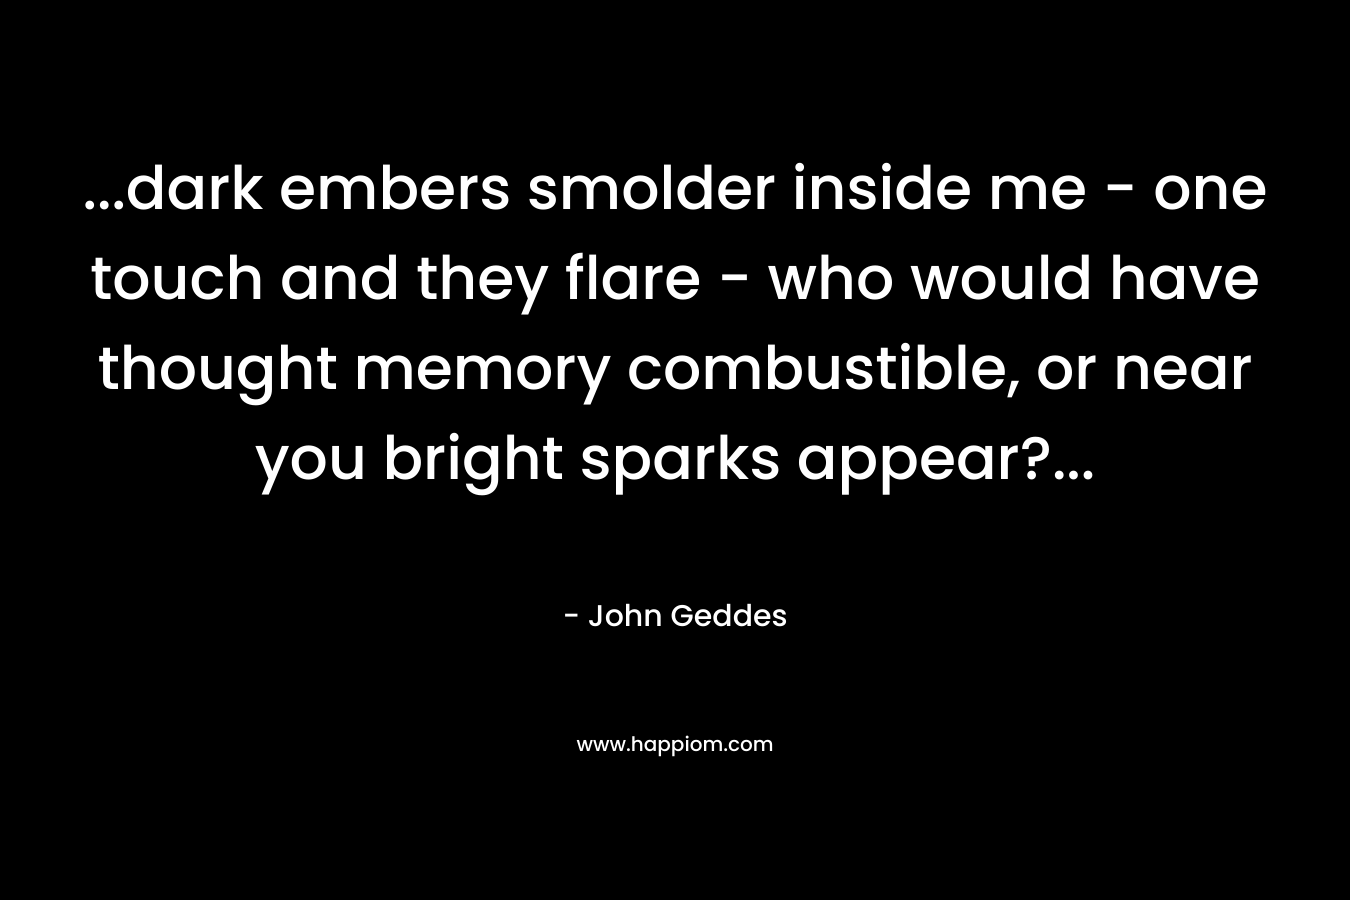 …dark embers smolder inside me – one touch and they flare – who would have thought memory combustible, or near you bright sparks appear?… – John Geddes